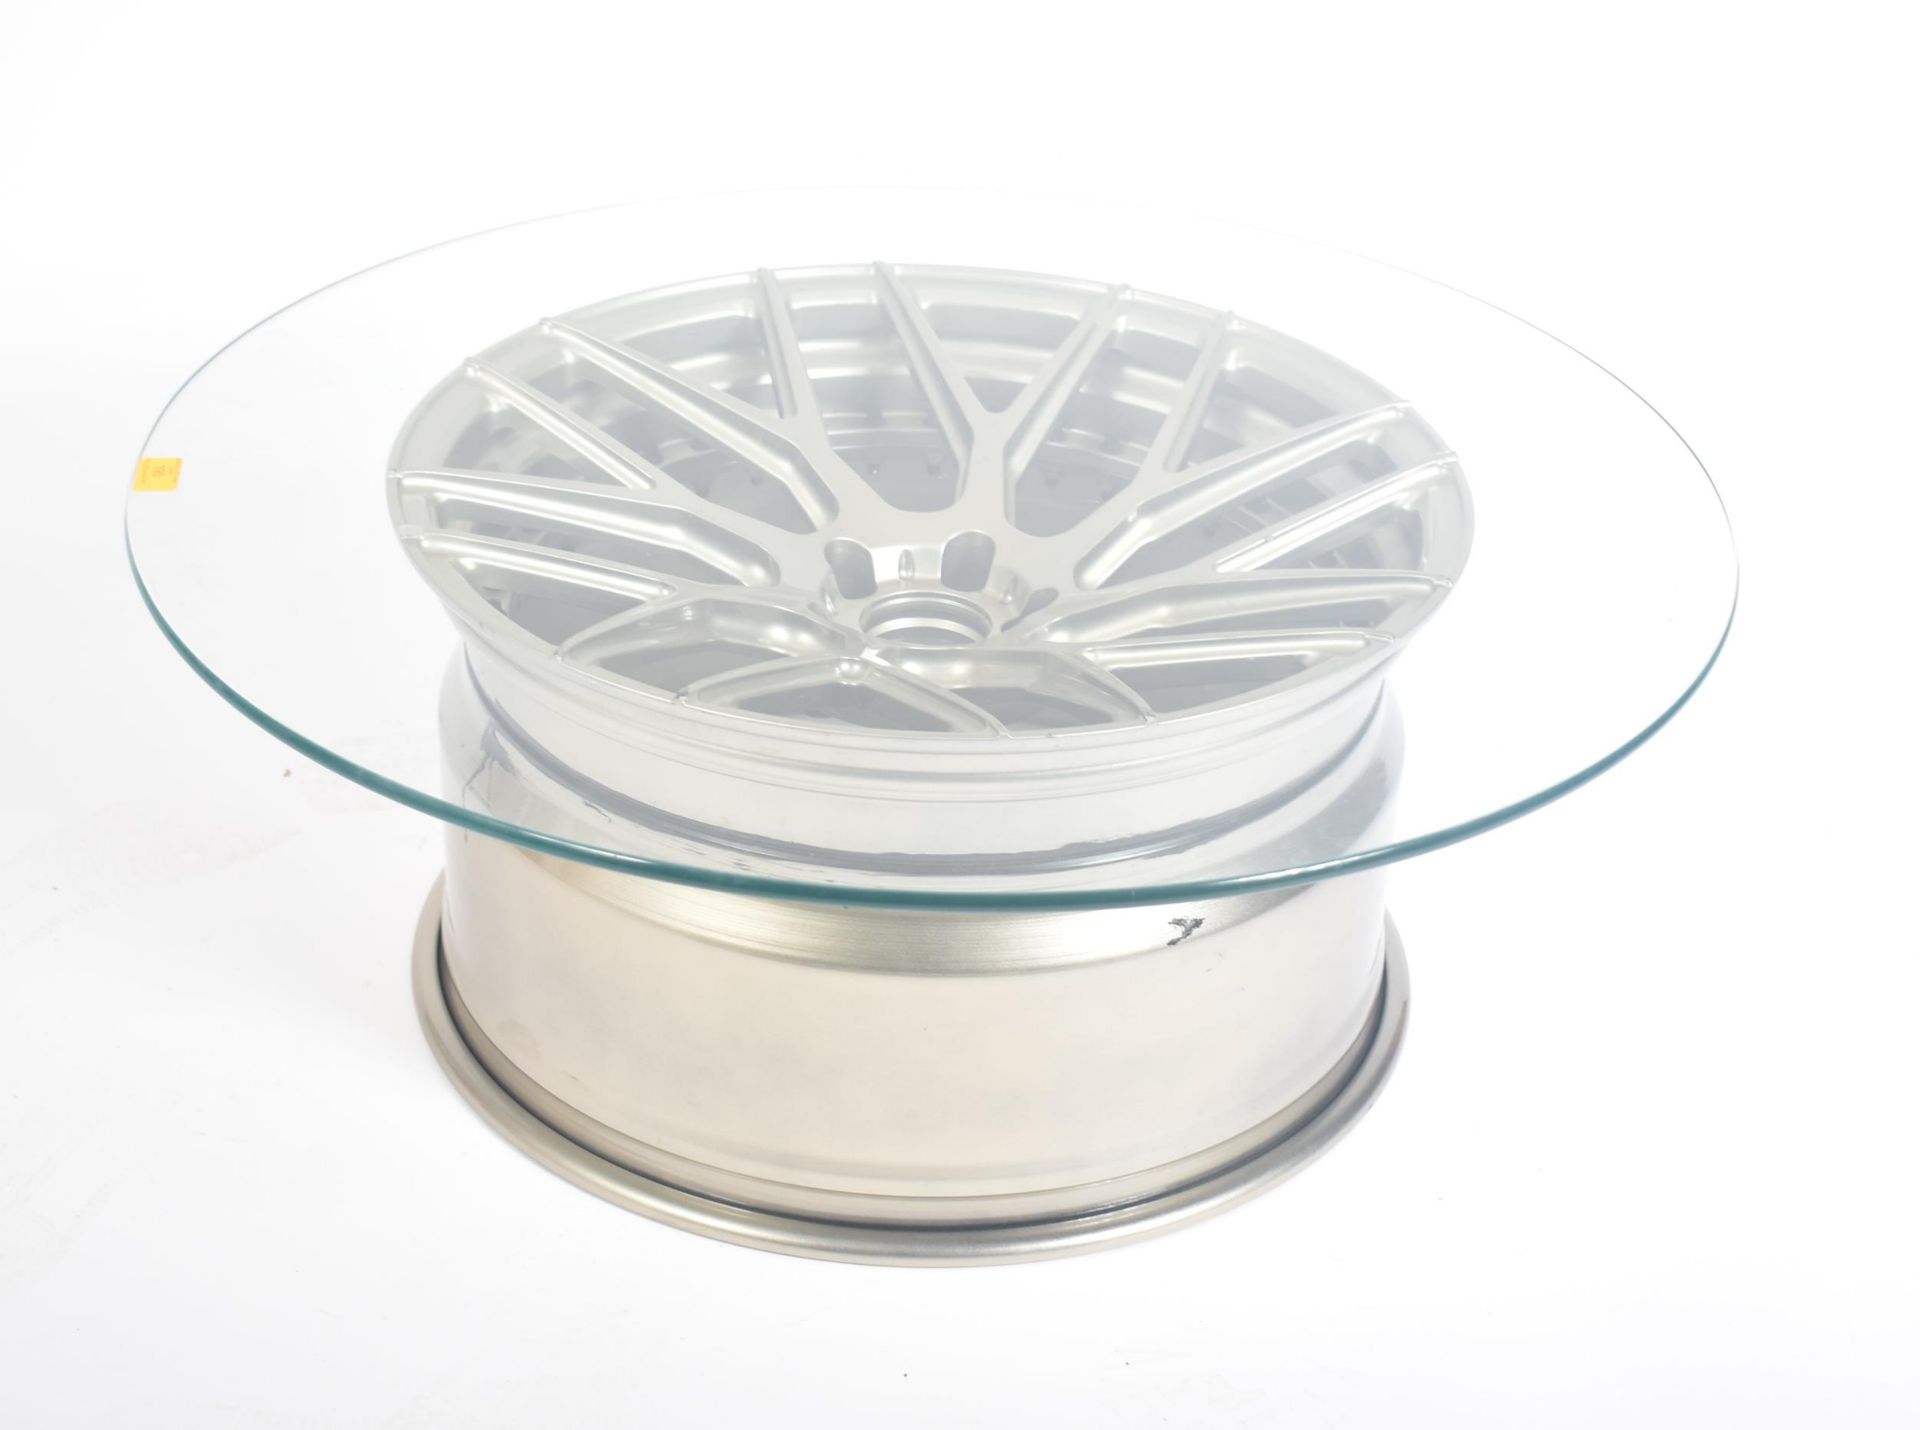 Lamborghini - A Converted Glass Top Occasional Low Coffee Table From A Lamborghini Aventador Anrky - Image 7 of 15